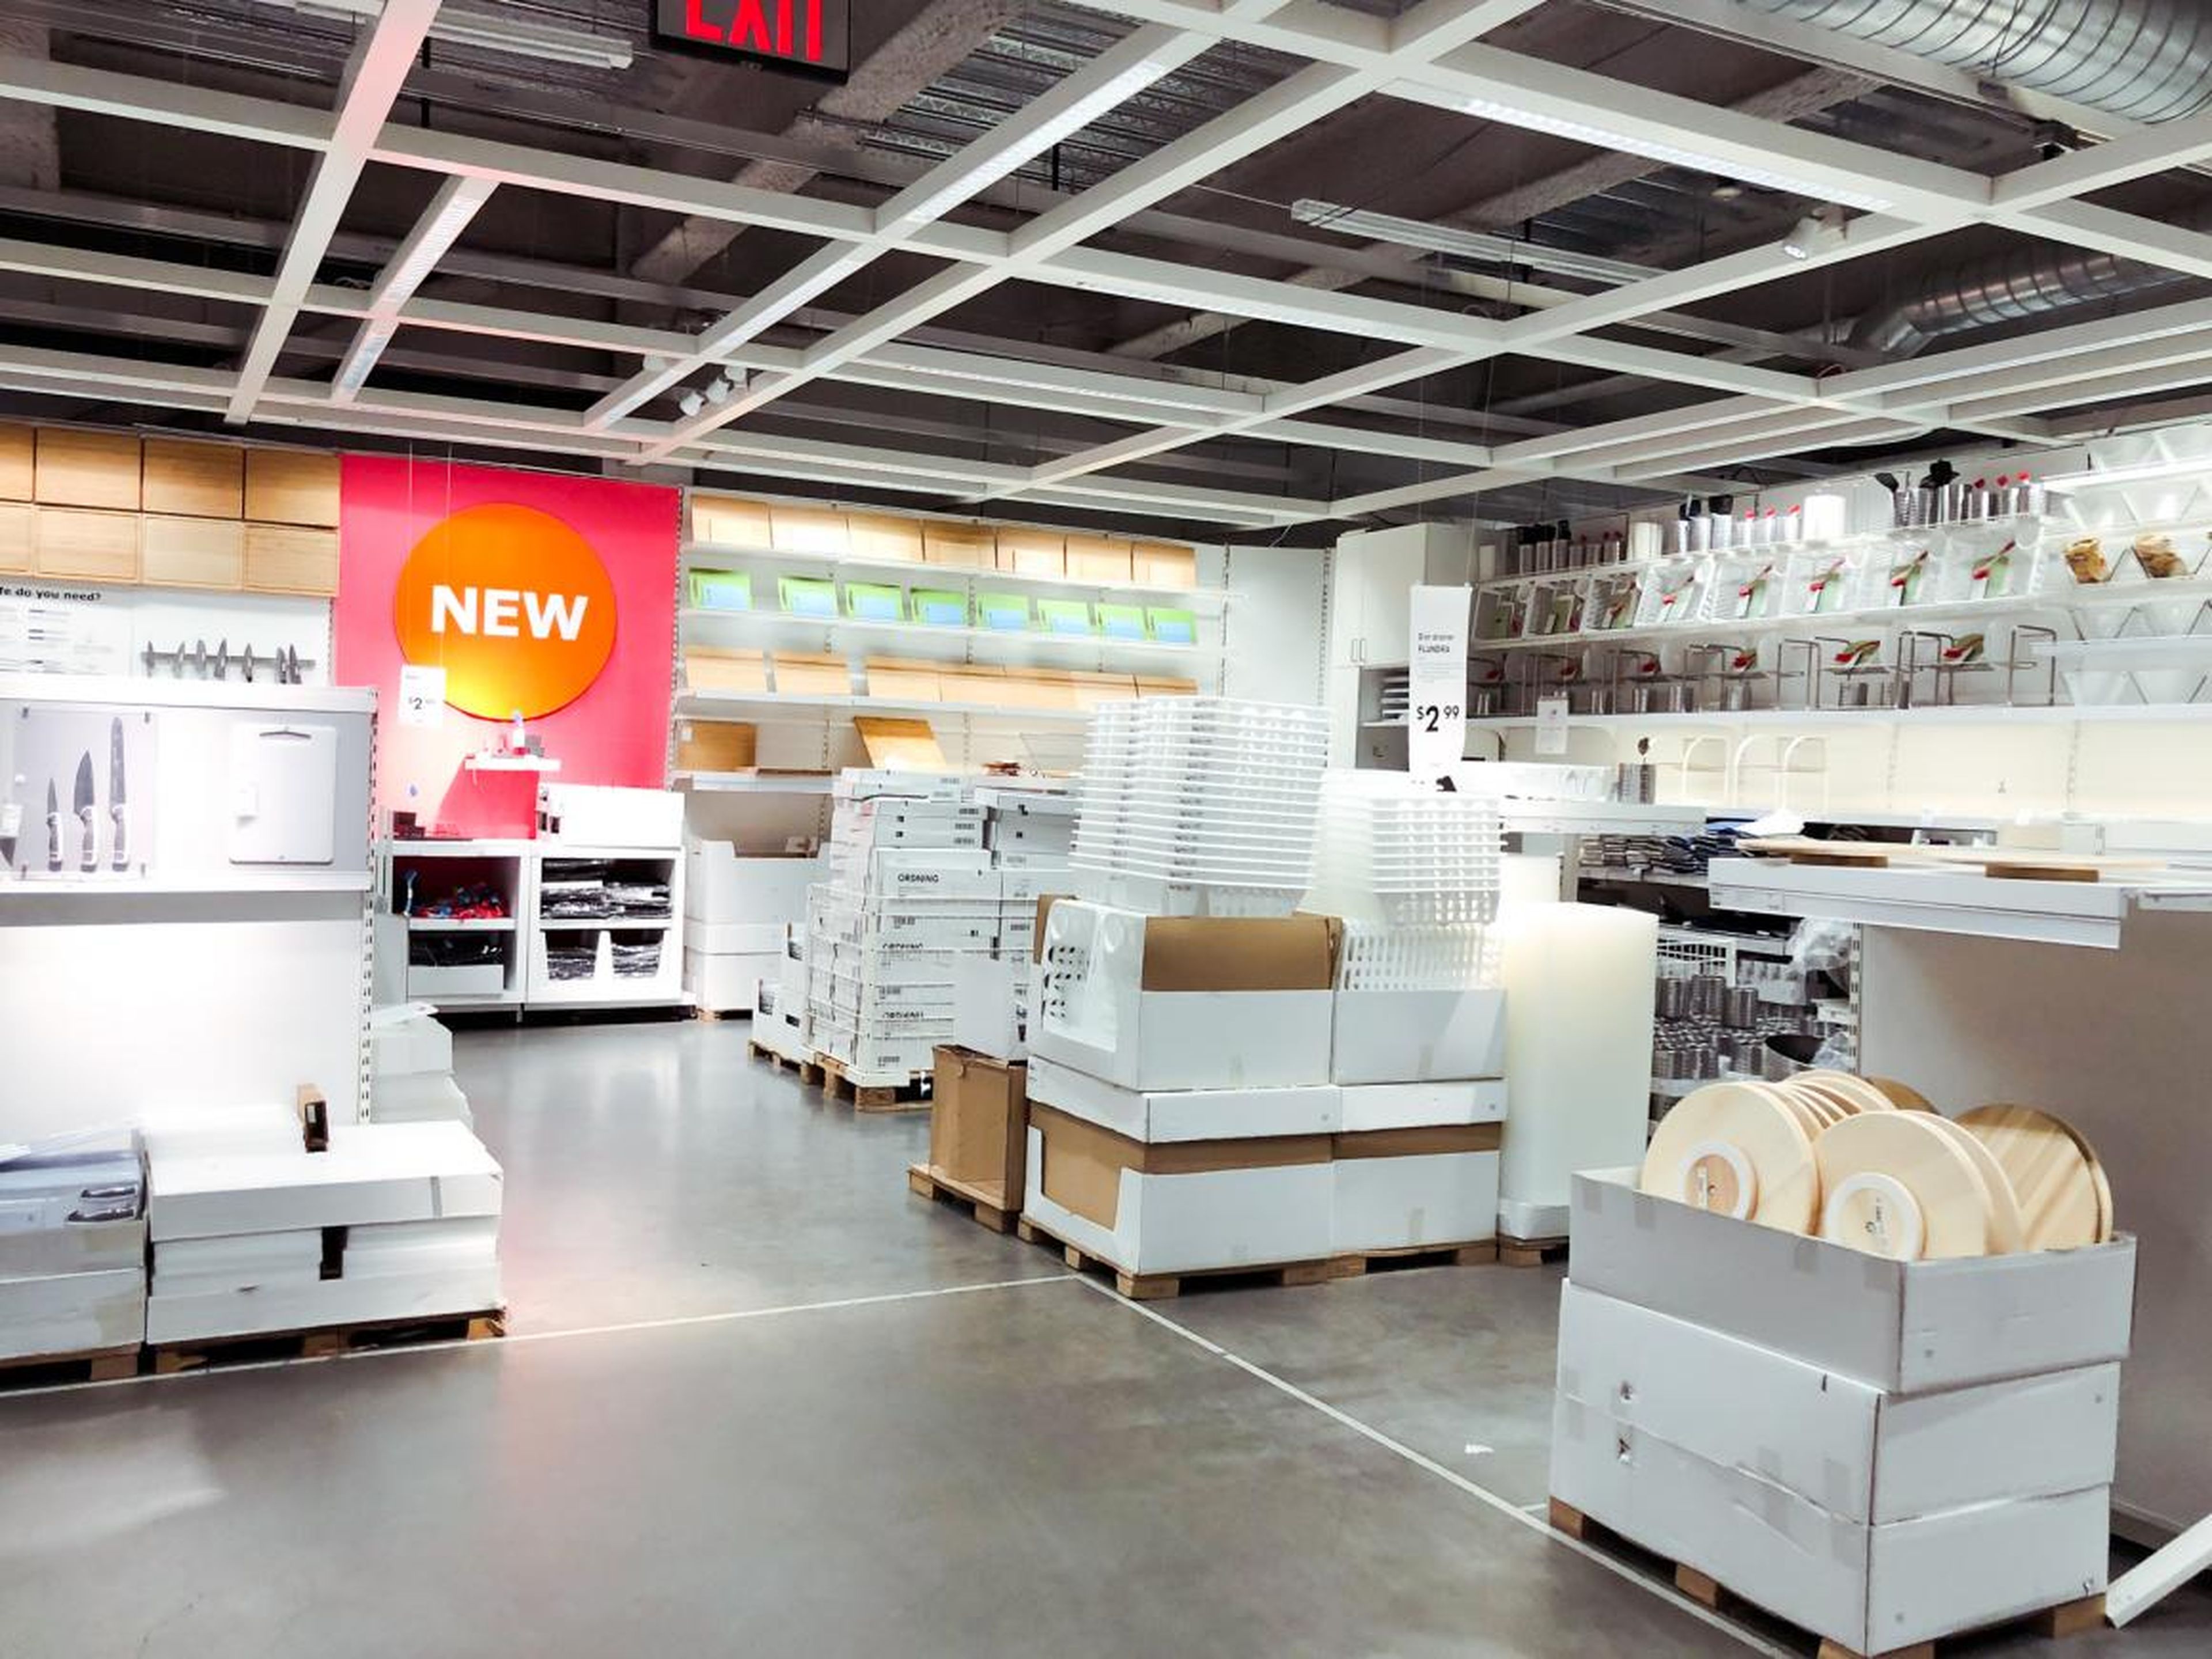 IKEA has a ton to offer. Most of the products it carries are pretty basic, and prices are low on a majority of what it carries. The quality varies a lot, and assembly is required on almost everything. But one of the biggest perks